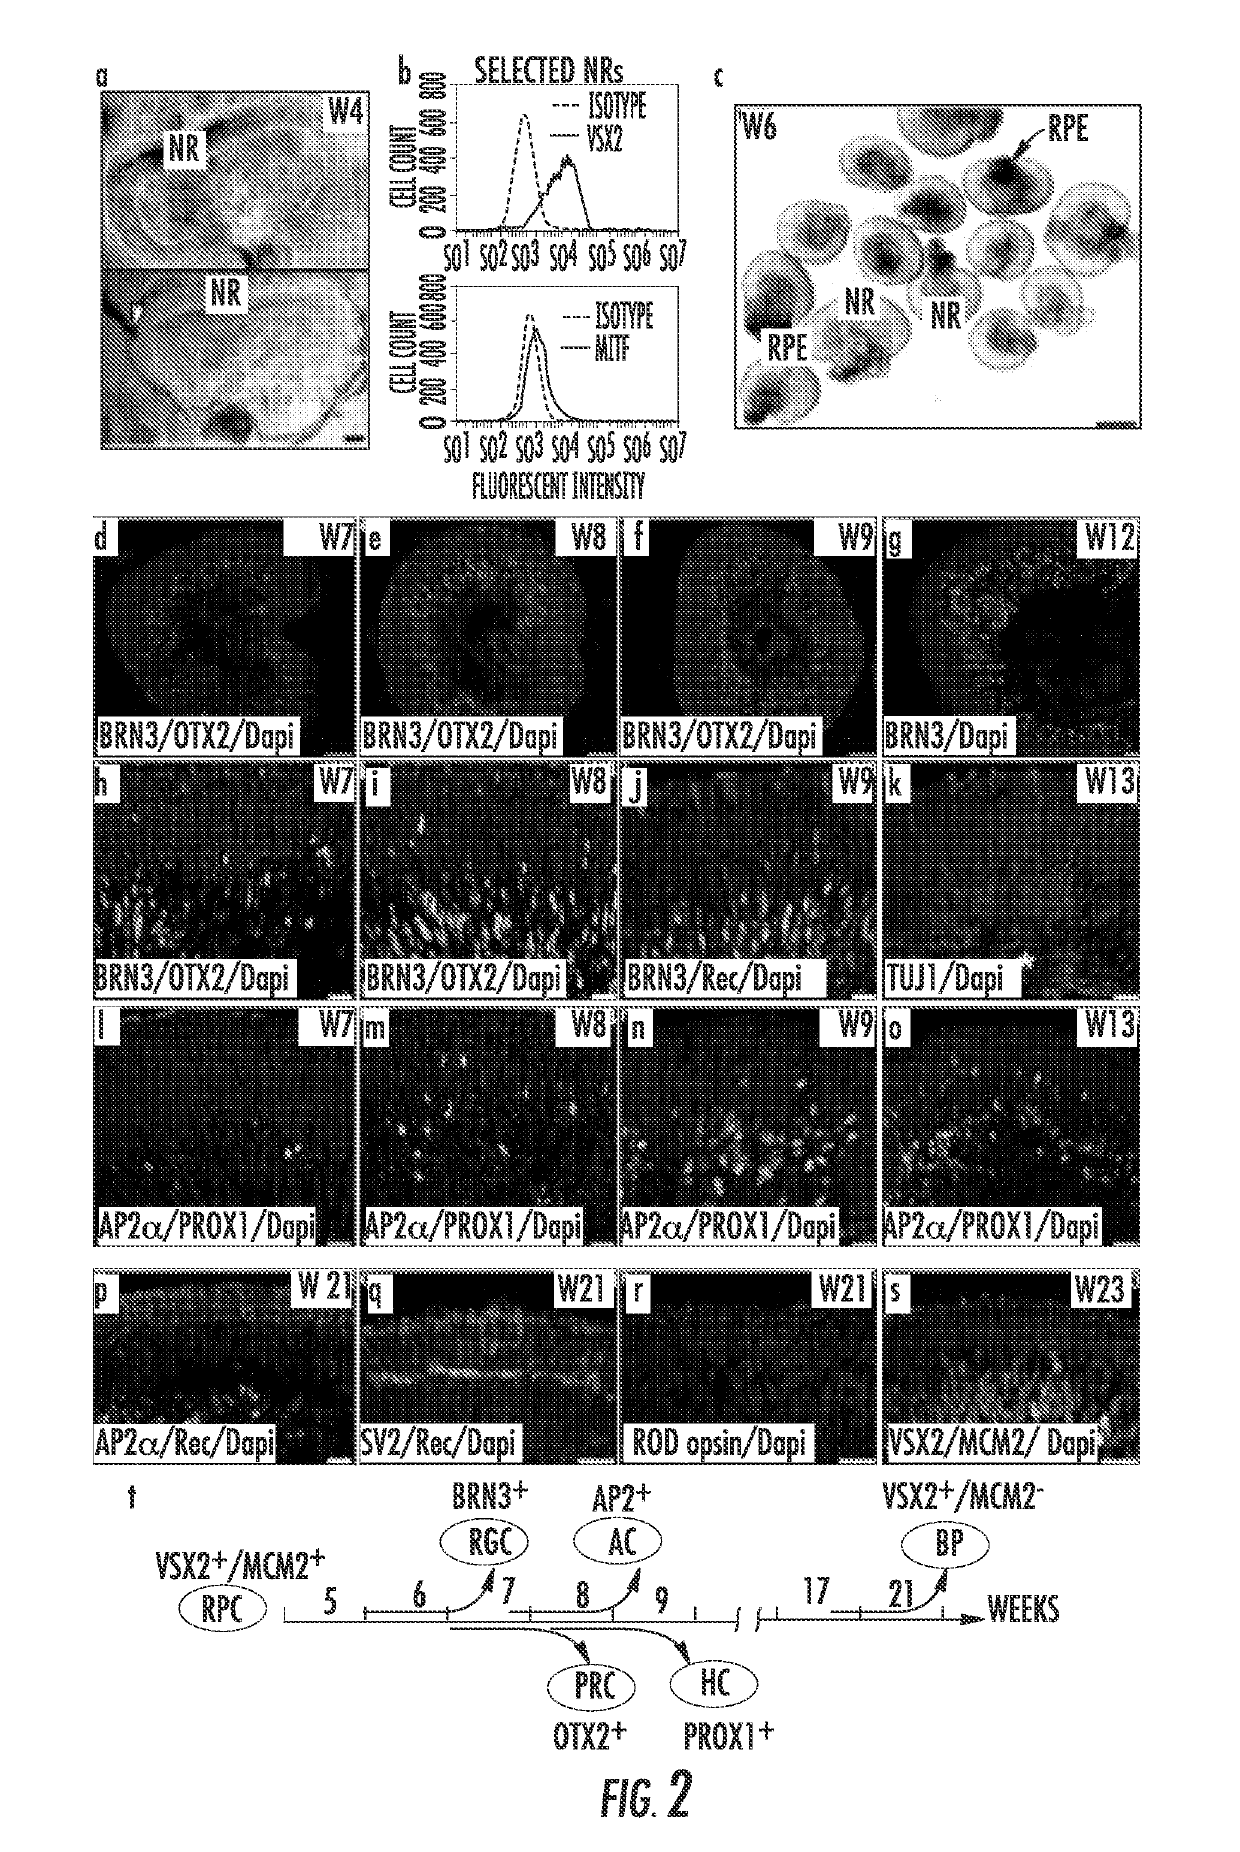 Methods for forming three-dimensional human retinal tissue in vitro